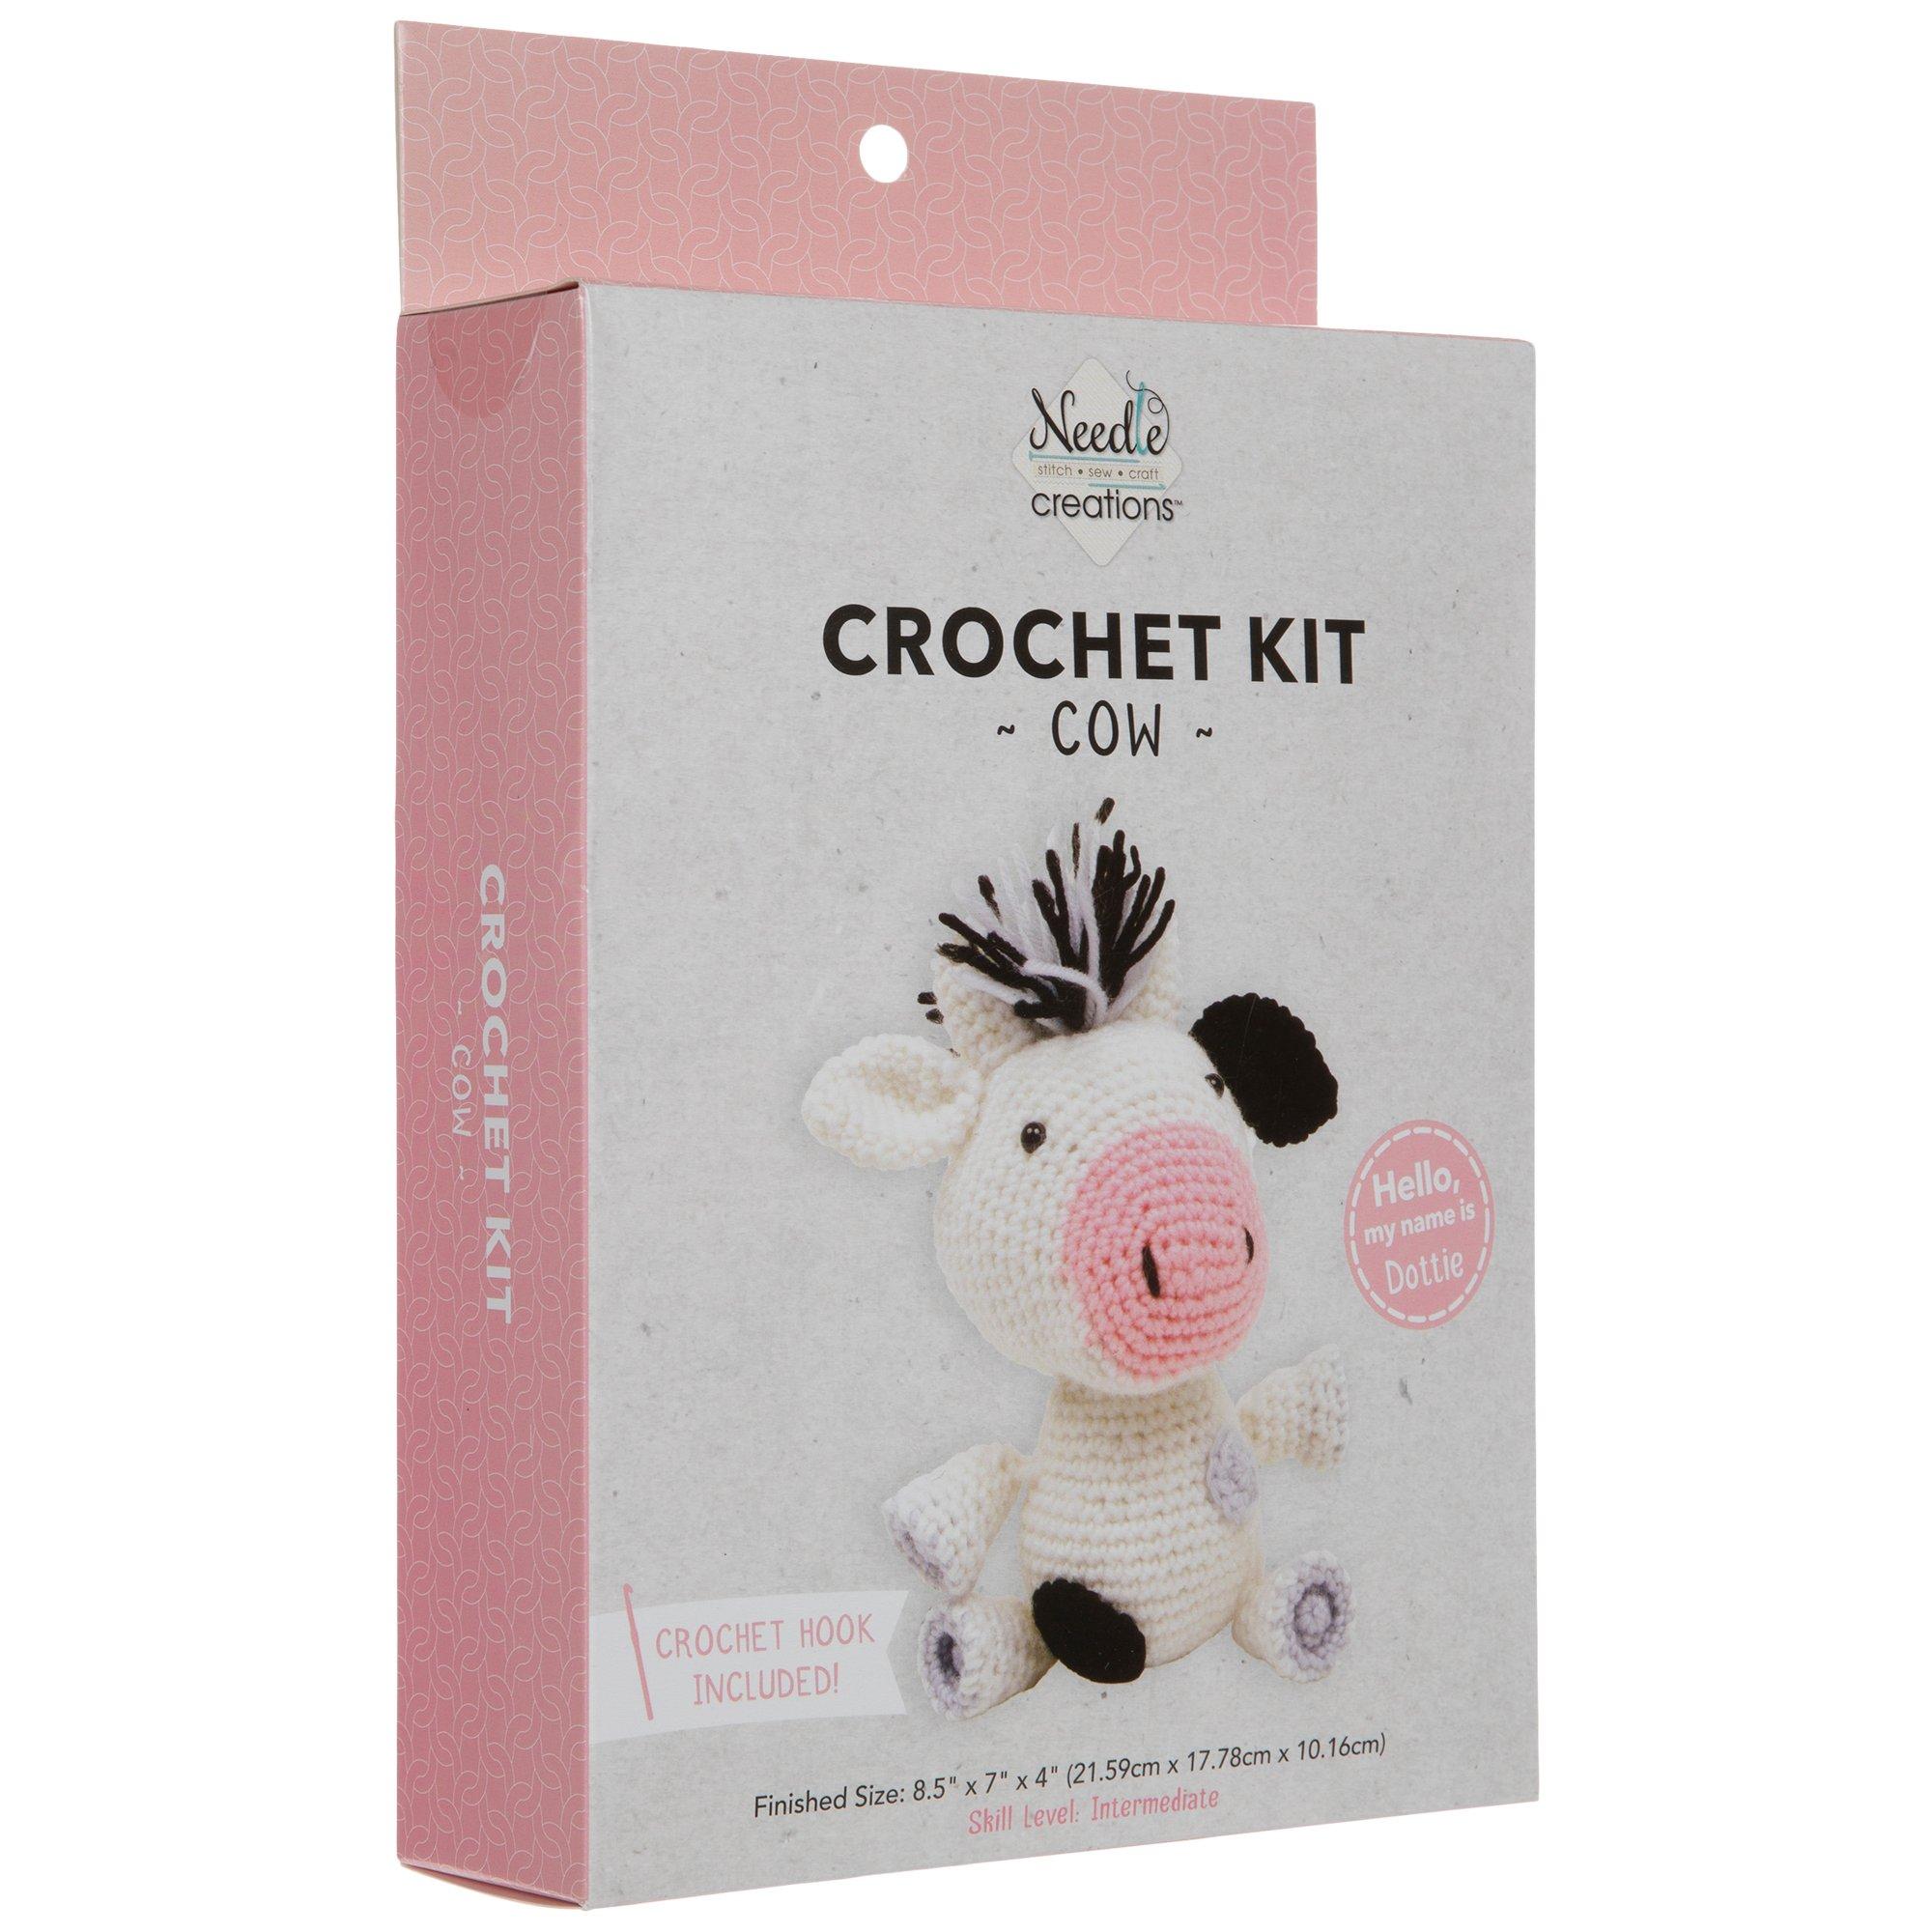 Fabric Editions Needle Creations Crochet Kit-Cow NCCRCHKT-COW - GettyCrafts